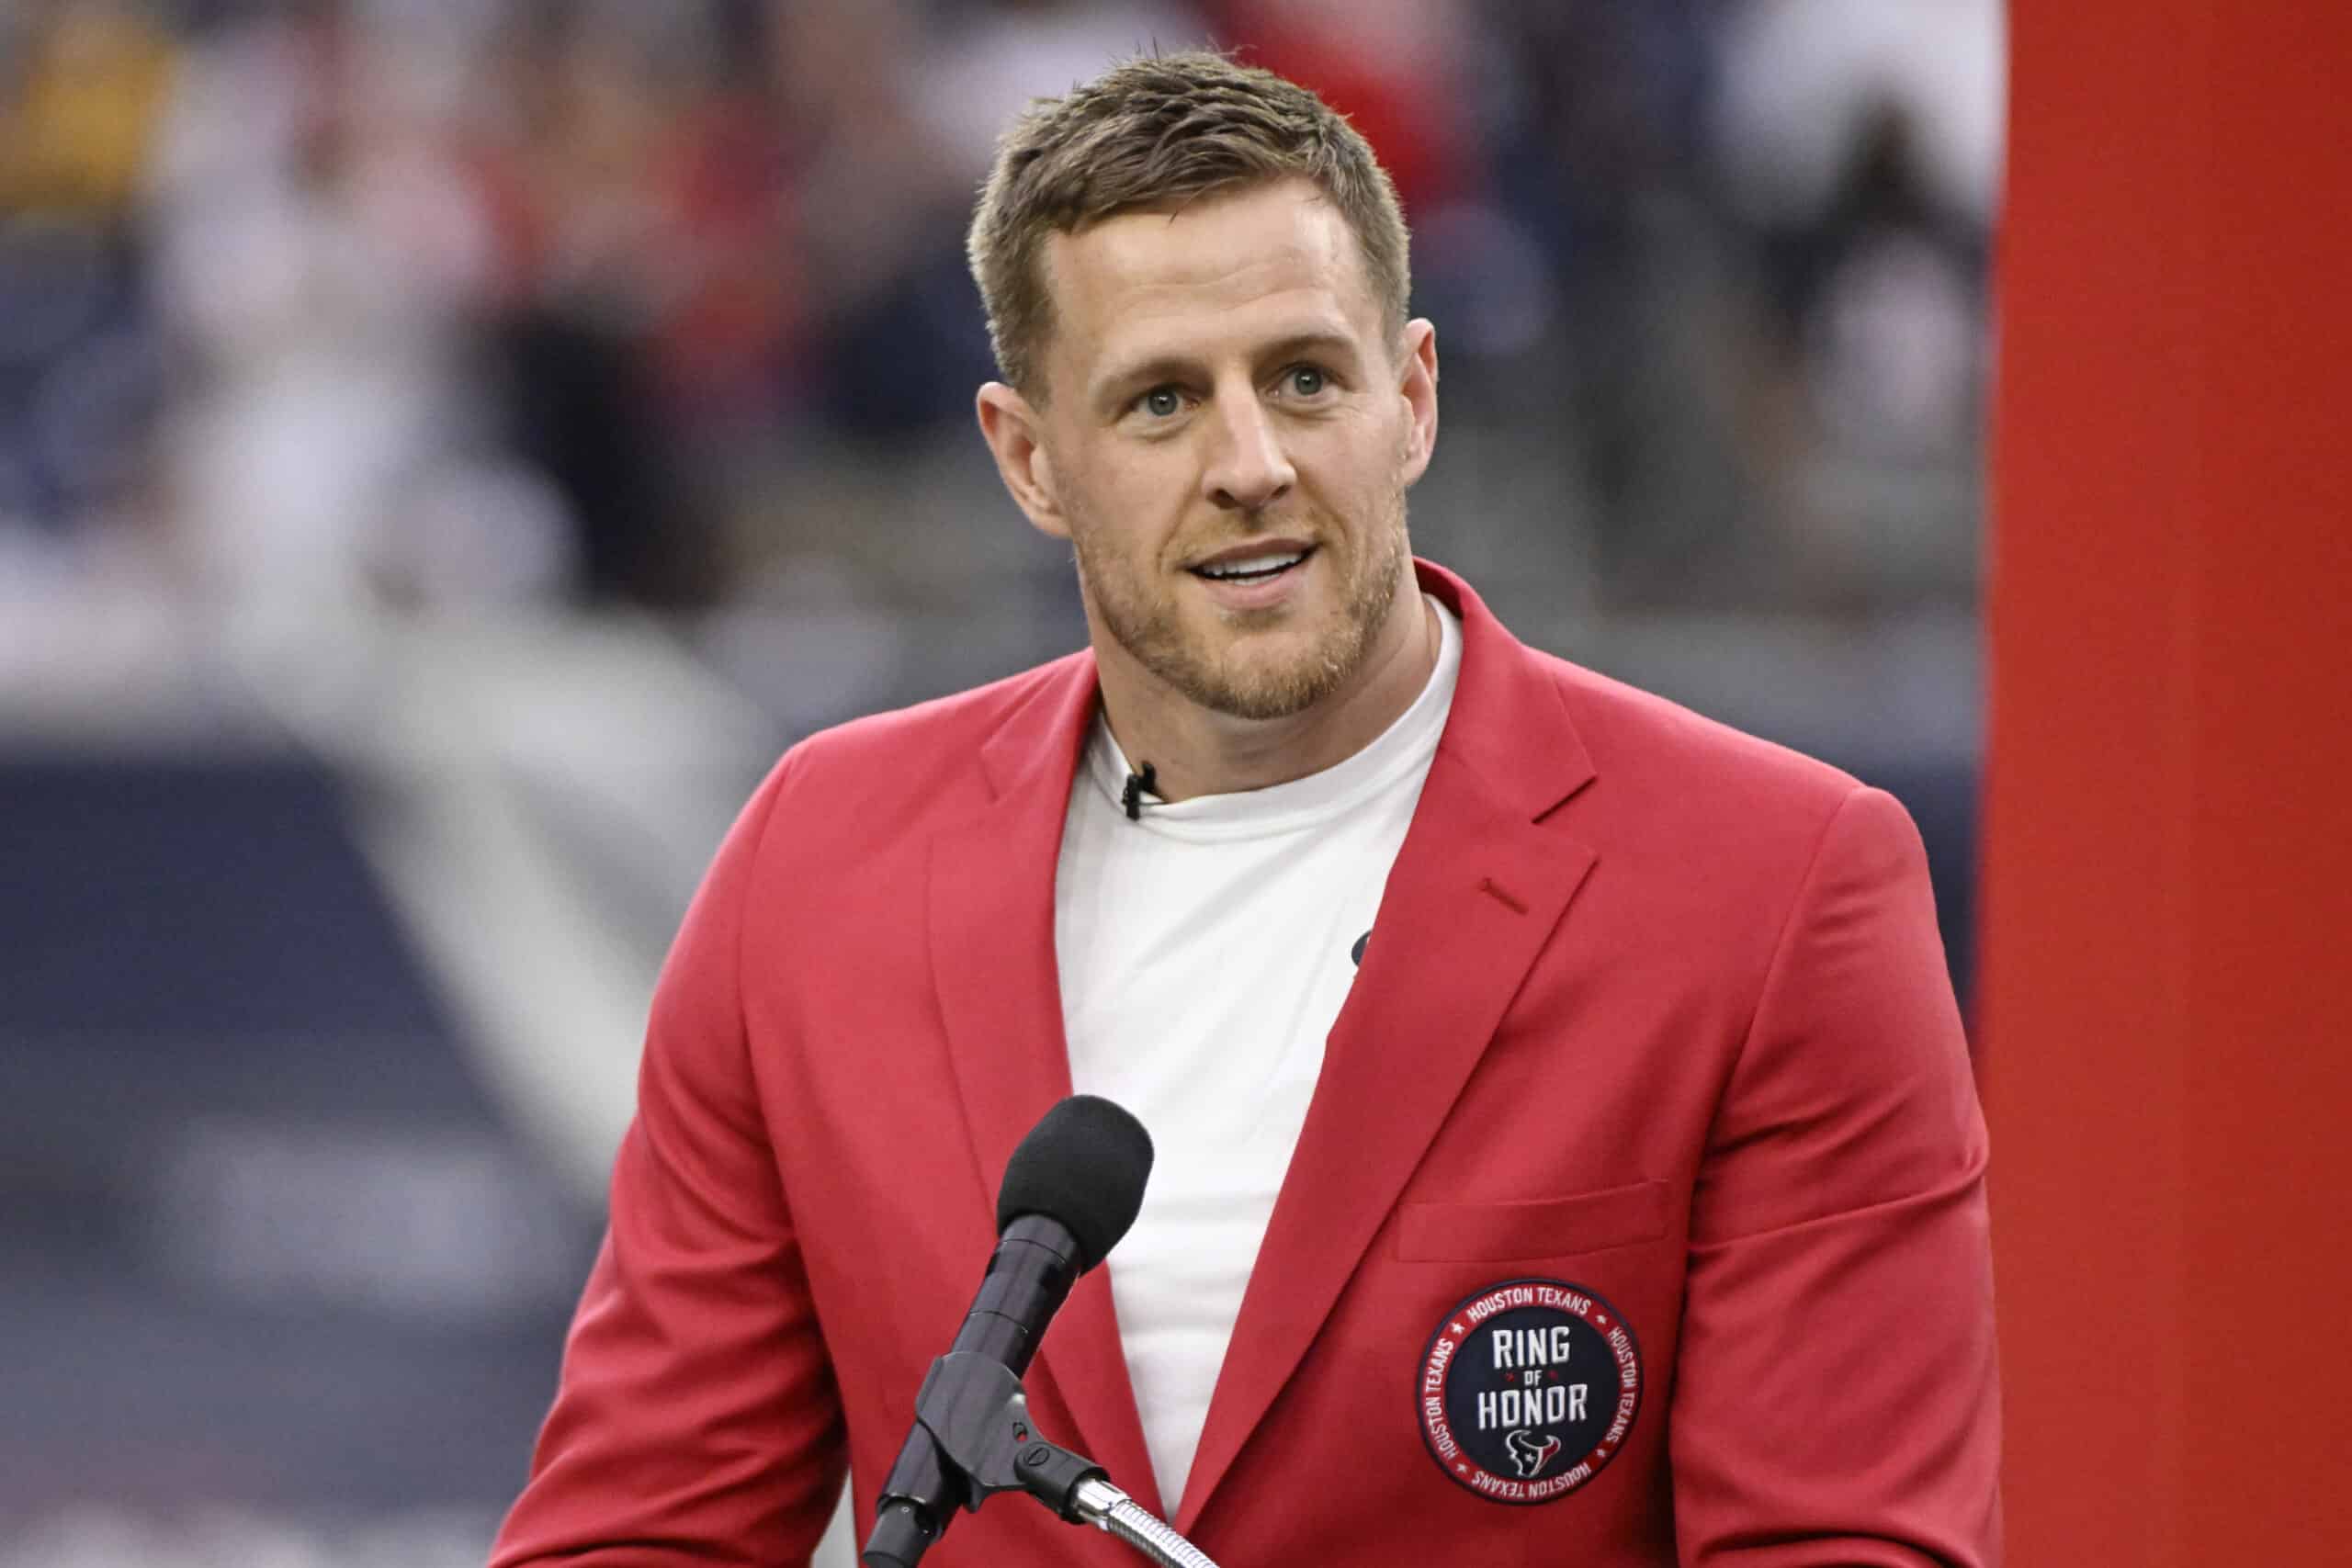 HOUSTON, TEXAS - OCTOBER 01: Former Houston Texans player J.J. Watt speaks during a ceremony inducting him into the Texans Ring of Honor during a game against the Pittsburgh Steelers at NRG Stadium on October 01, 2023 in Houston, Texas. (Photo by Logan Riely/Getty Images)